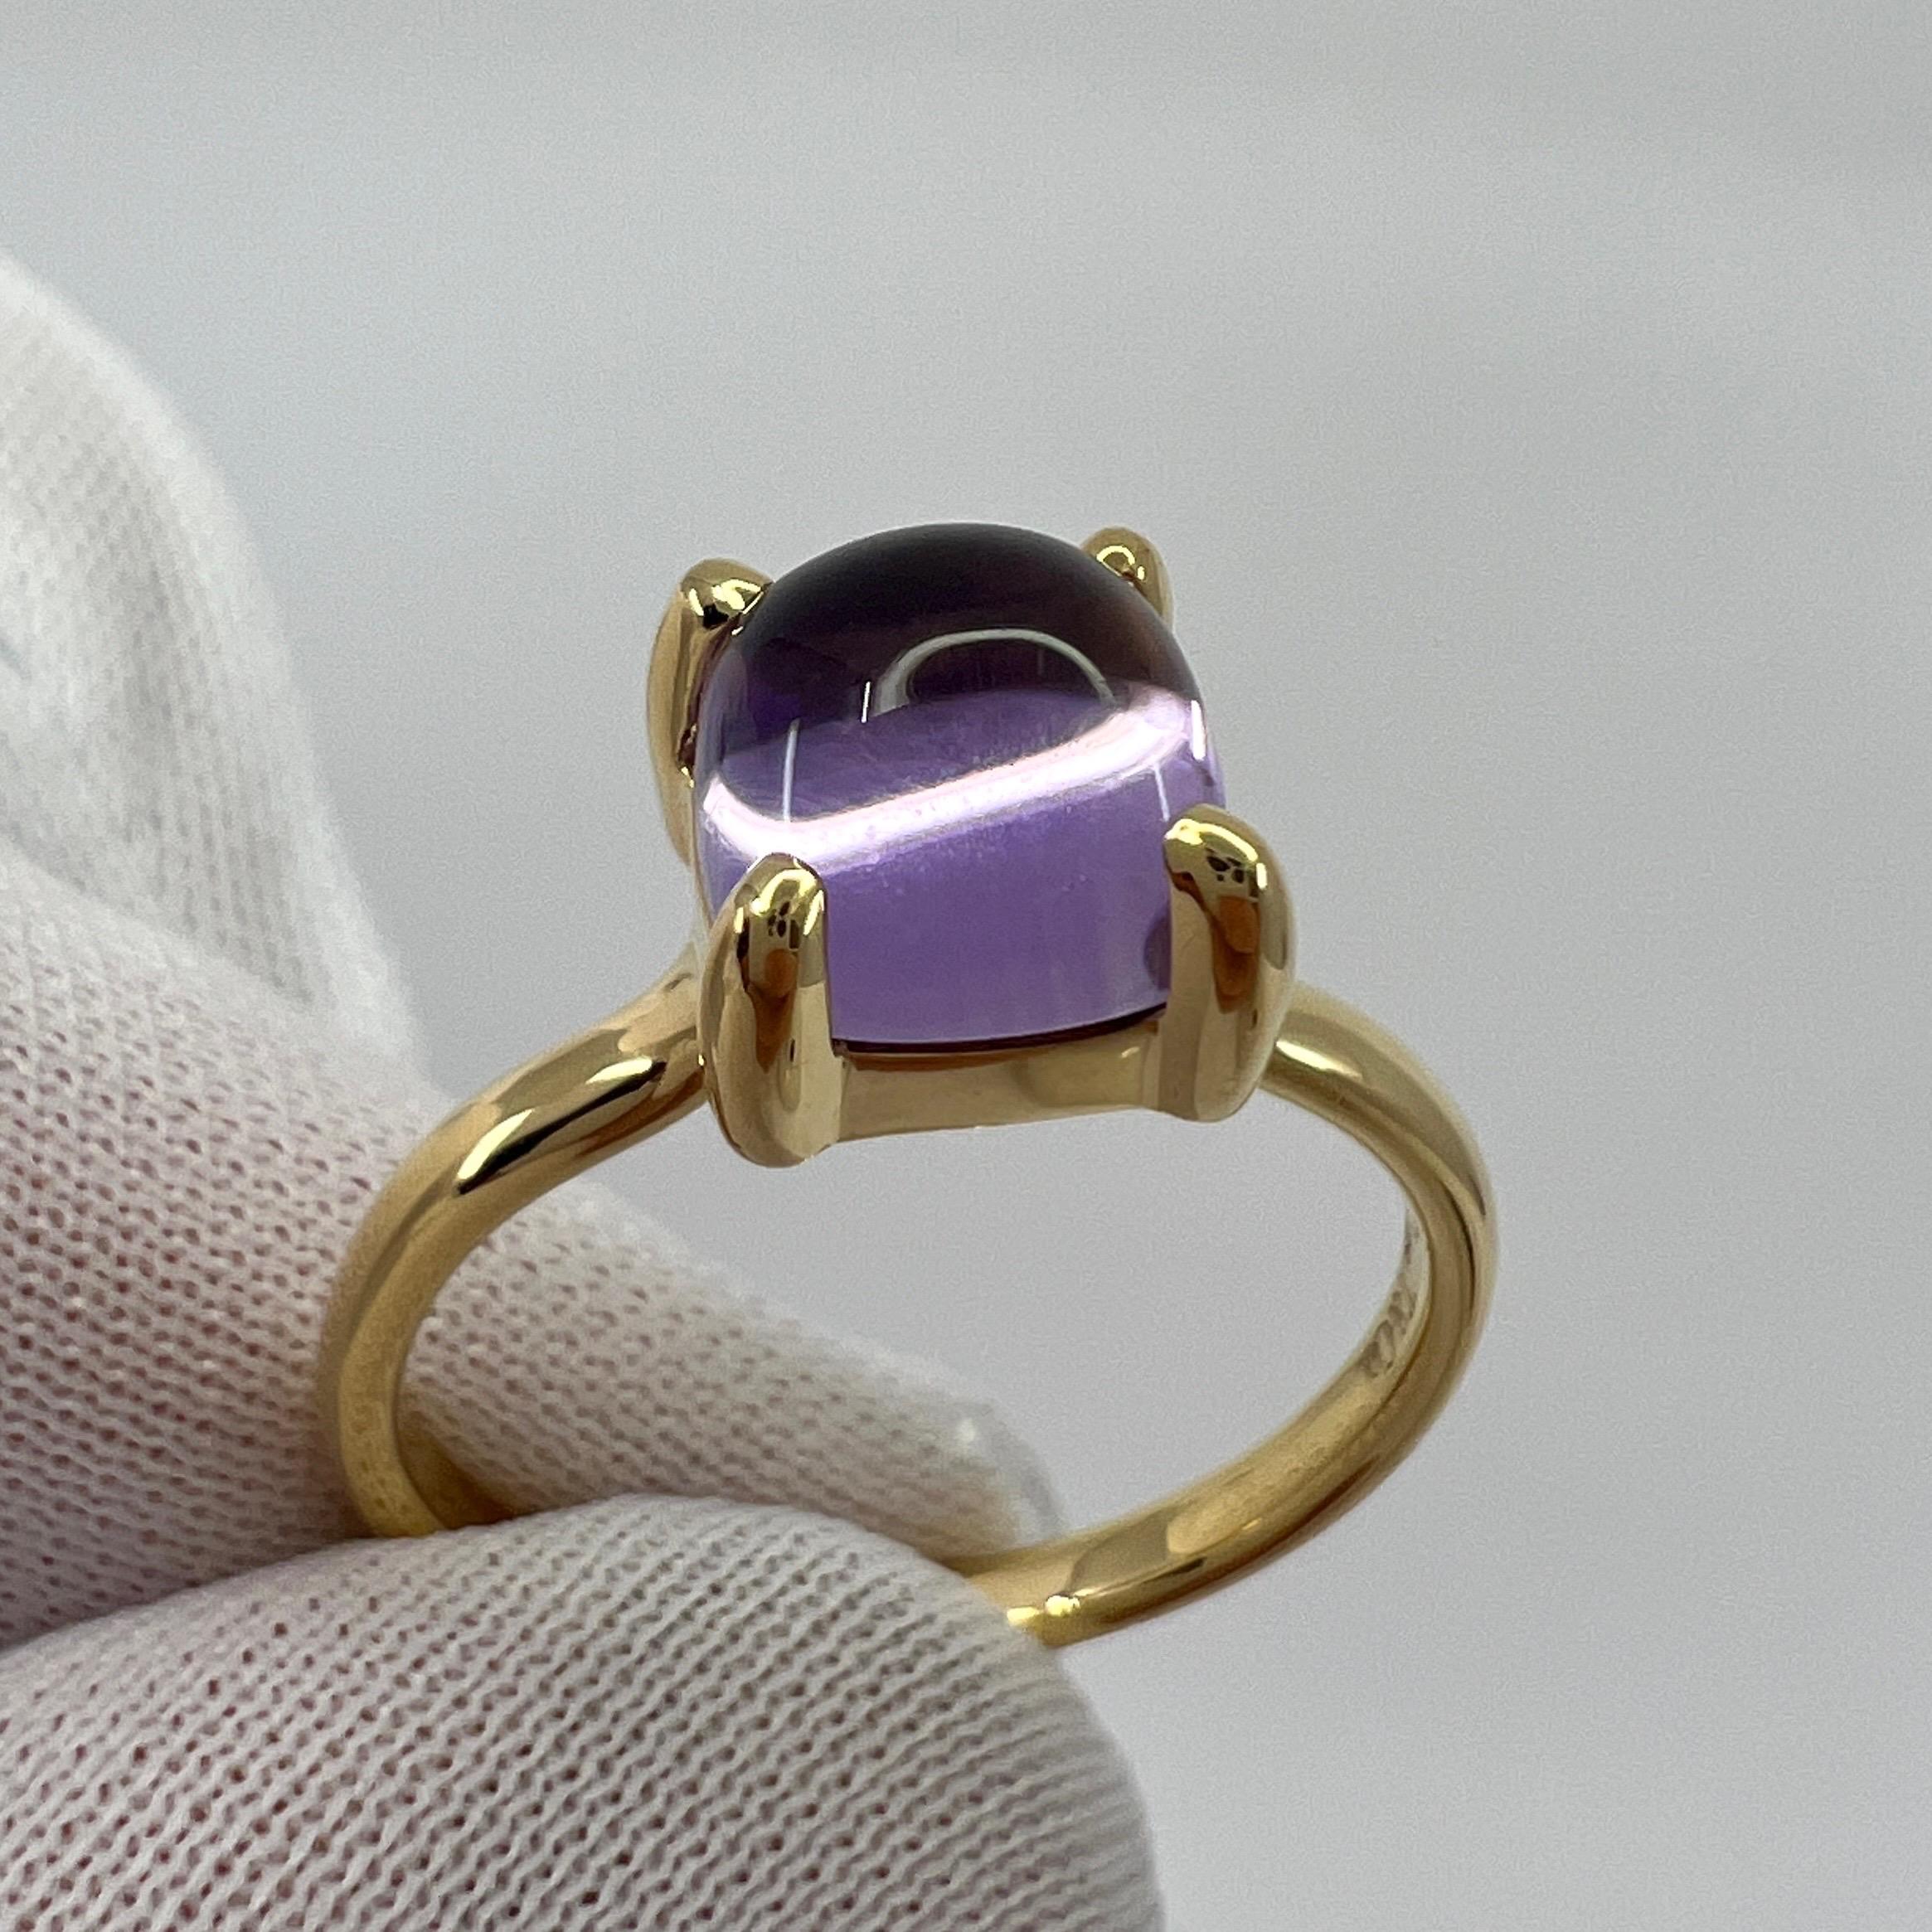 Rare Vintage Tiffany & Co. Paloma Picasso Amethyst Sugar Stack 18k Yellow Gold Ring.

A beautiful and rare sugarloaf purple amethyst ring from the Tiffany & Co Paloma Picasso collection.

Fine jewellery houses like Tiffany only use the finest